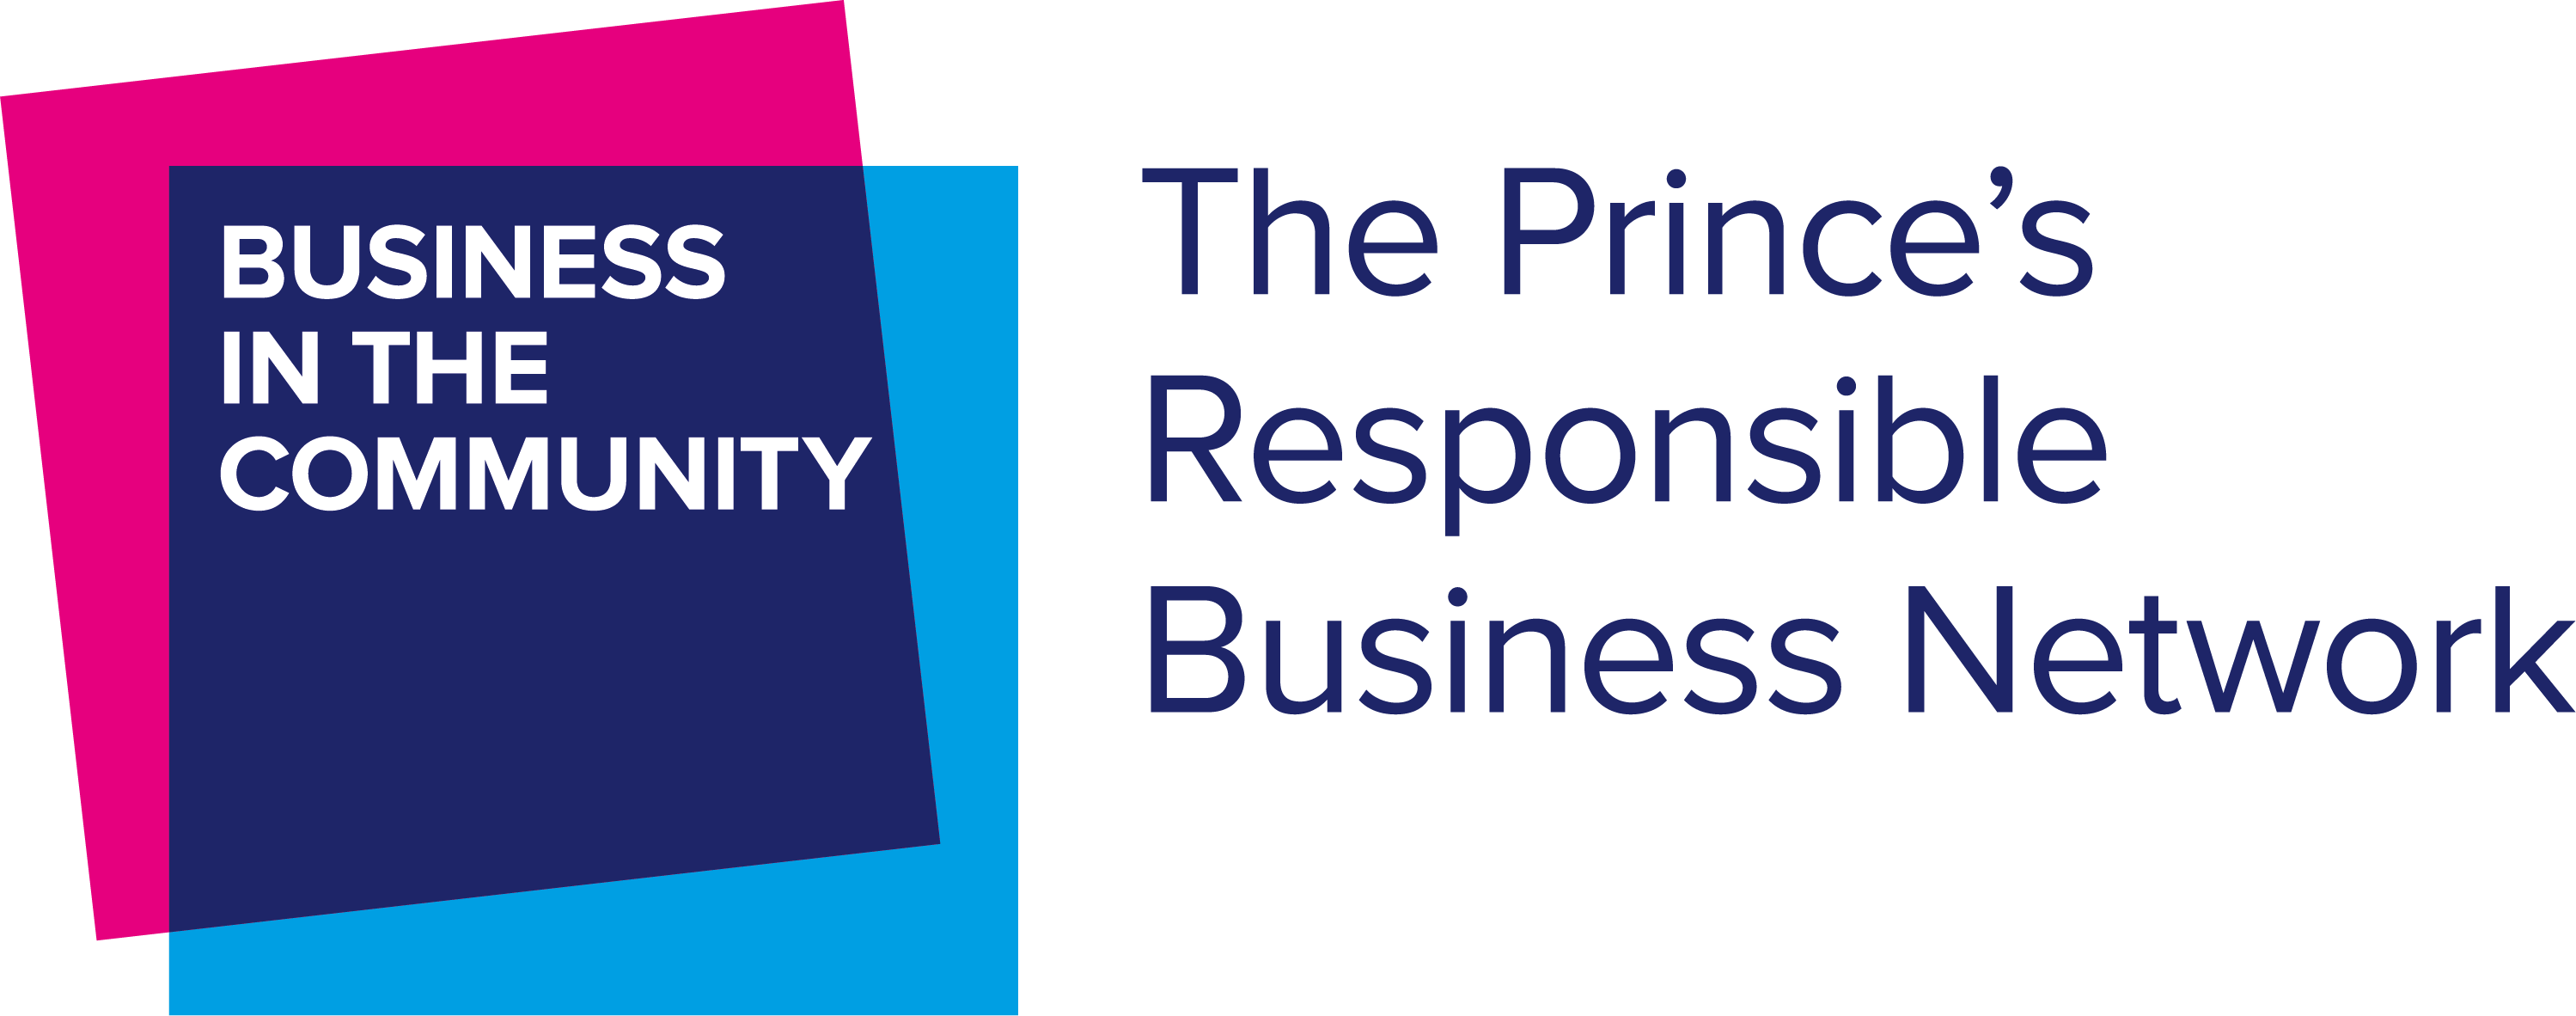 BITC - The Prince's Responsible Business Network